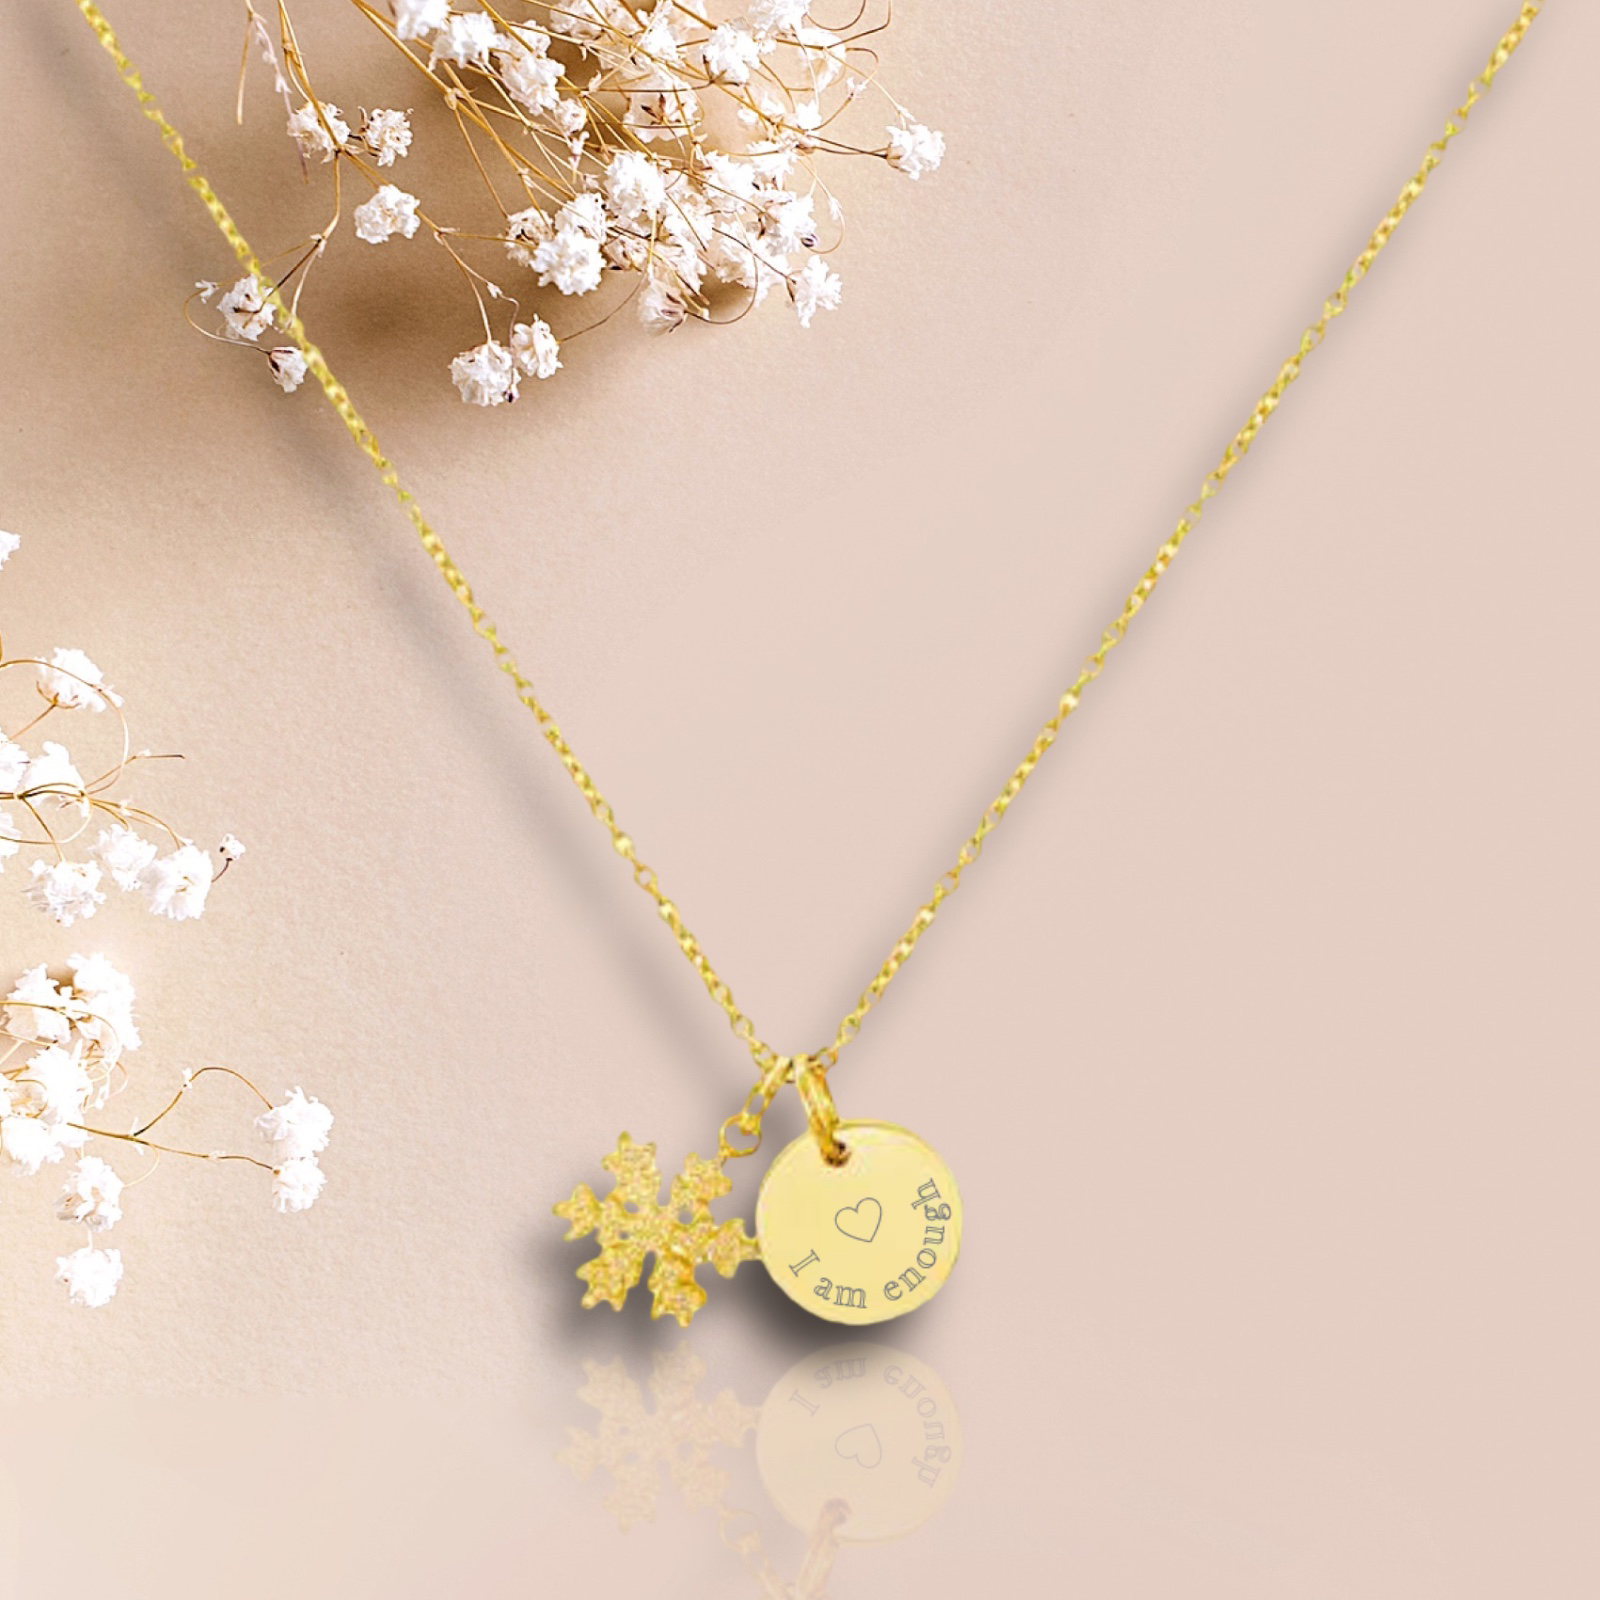 Snowflake Charm Necklace - Gold